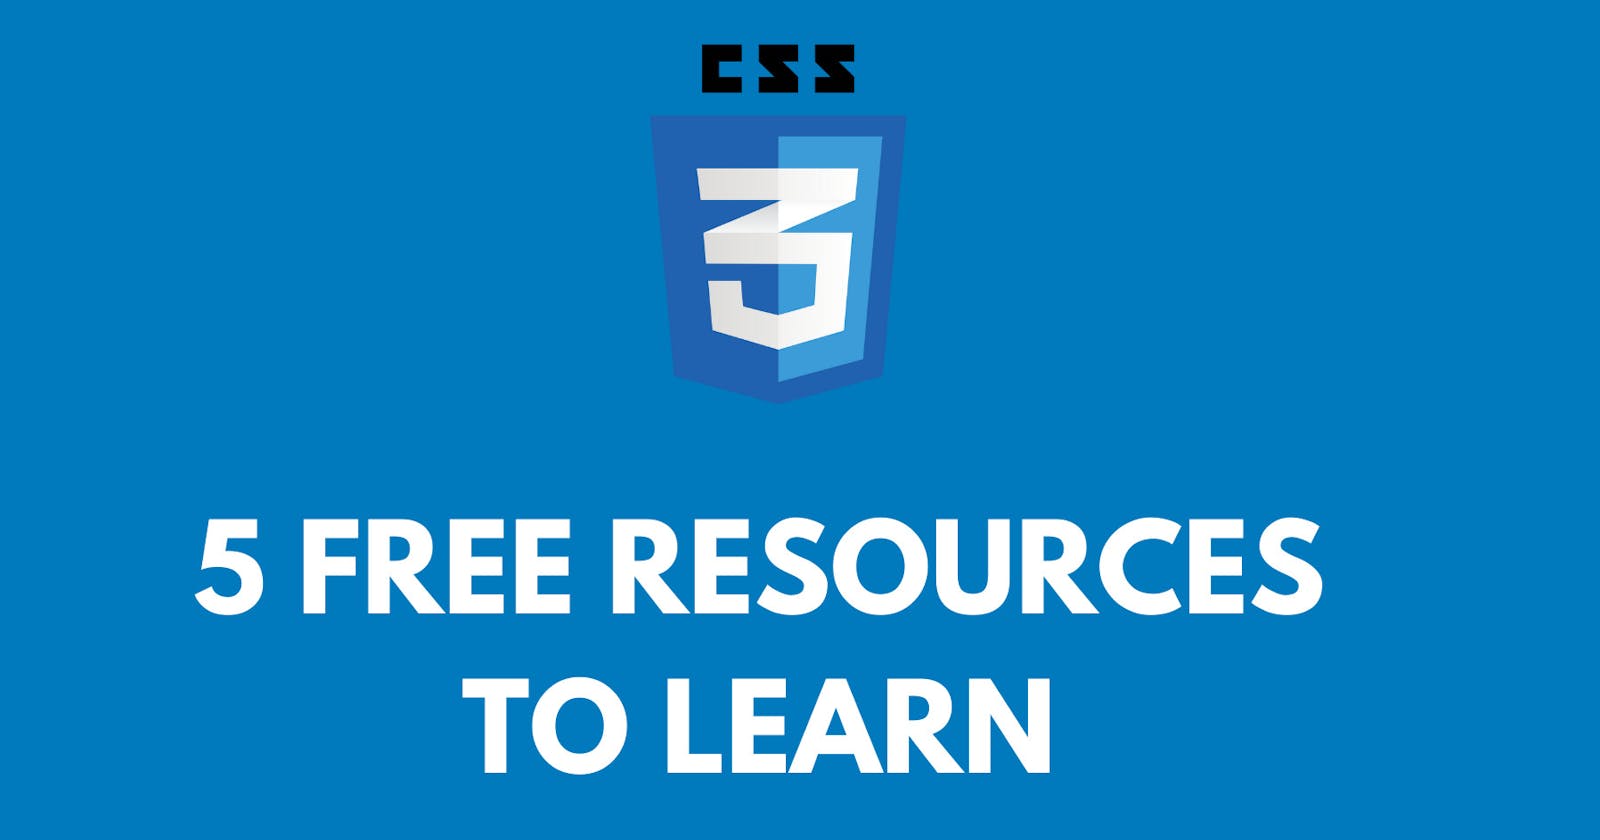 Top 5 resources to learn CSS